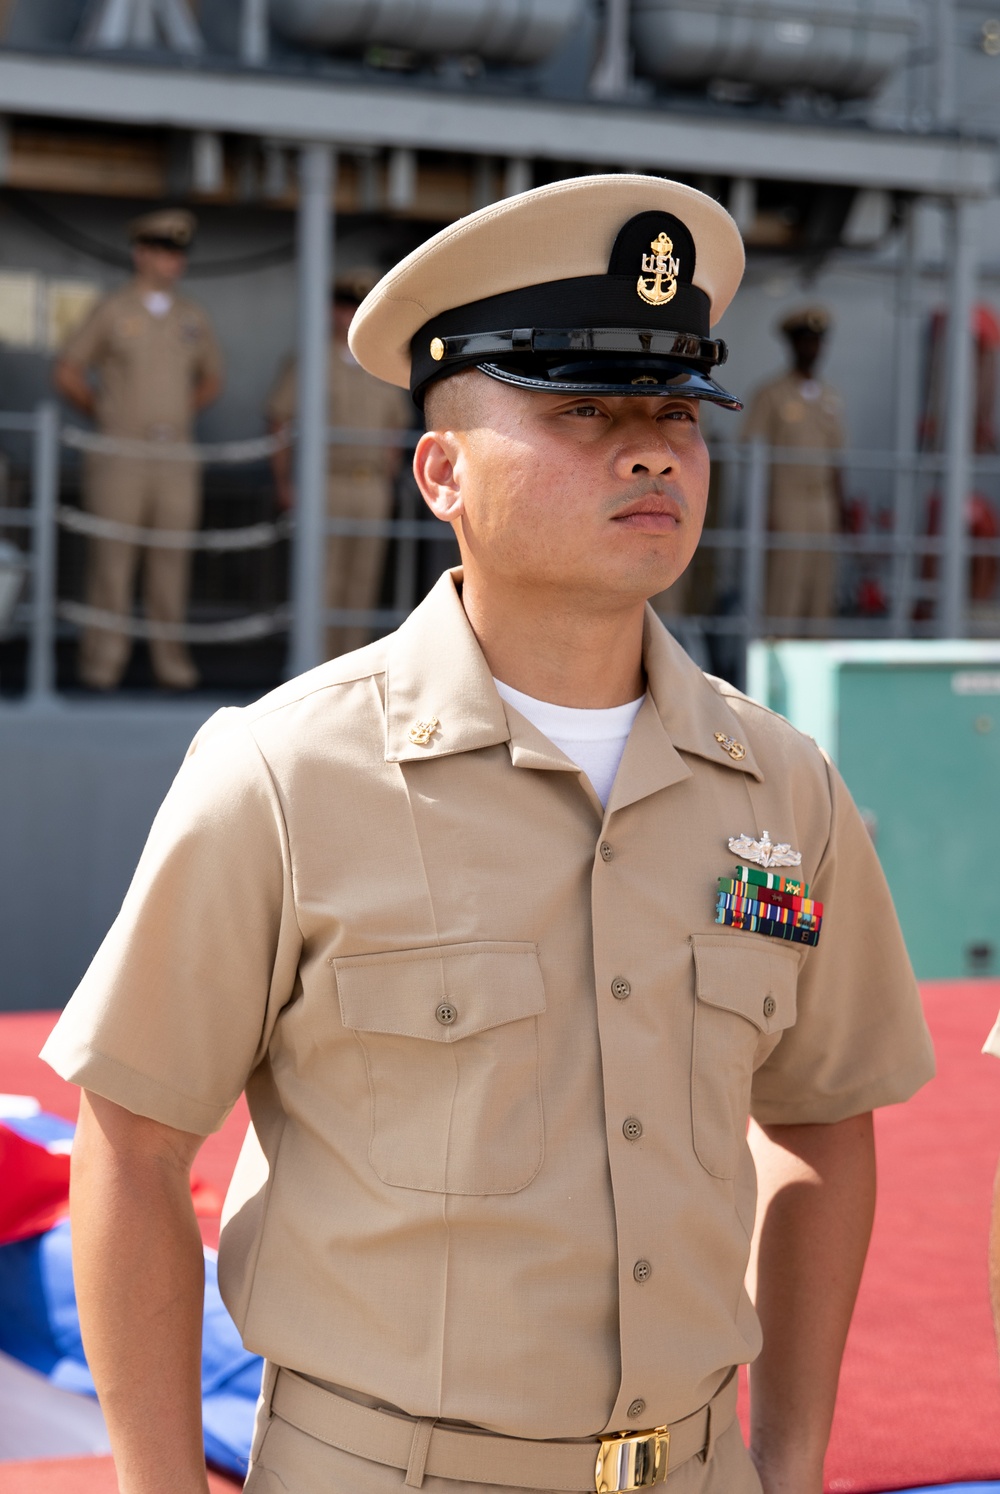 Chief Petty Officer Pua Xiong aboard Avenger-class mine countermeasures ship USS Pioneer (MCM 9), just pinned as a Chief Petty Officer, stands at attention.